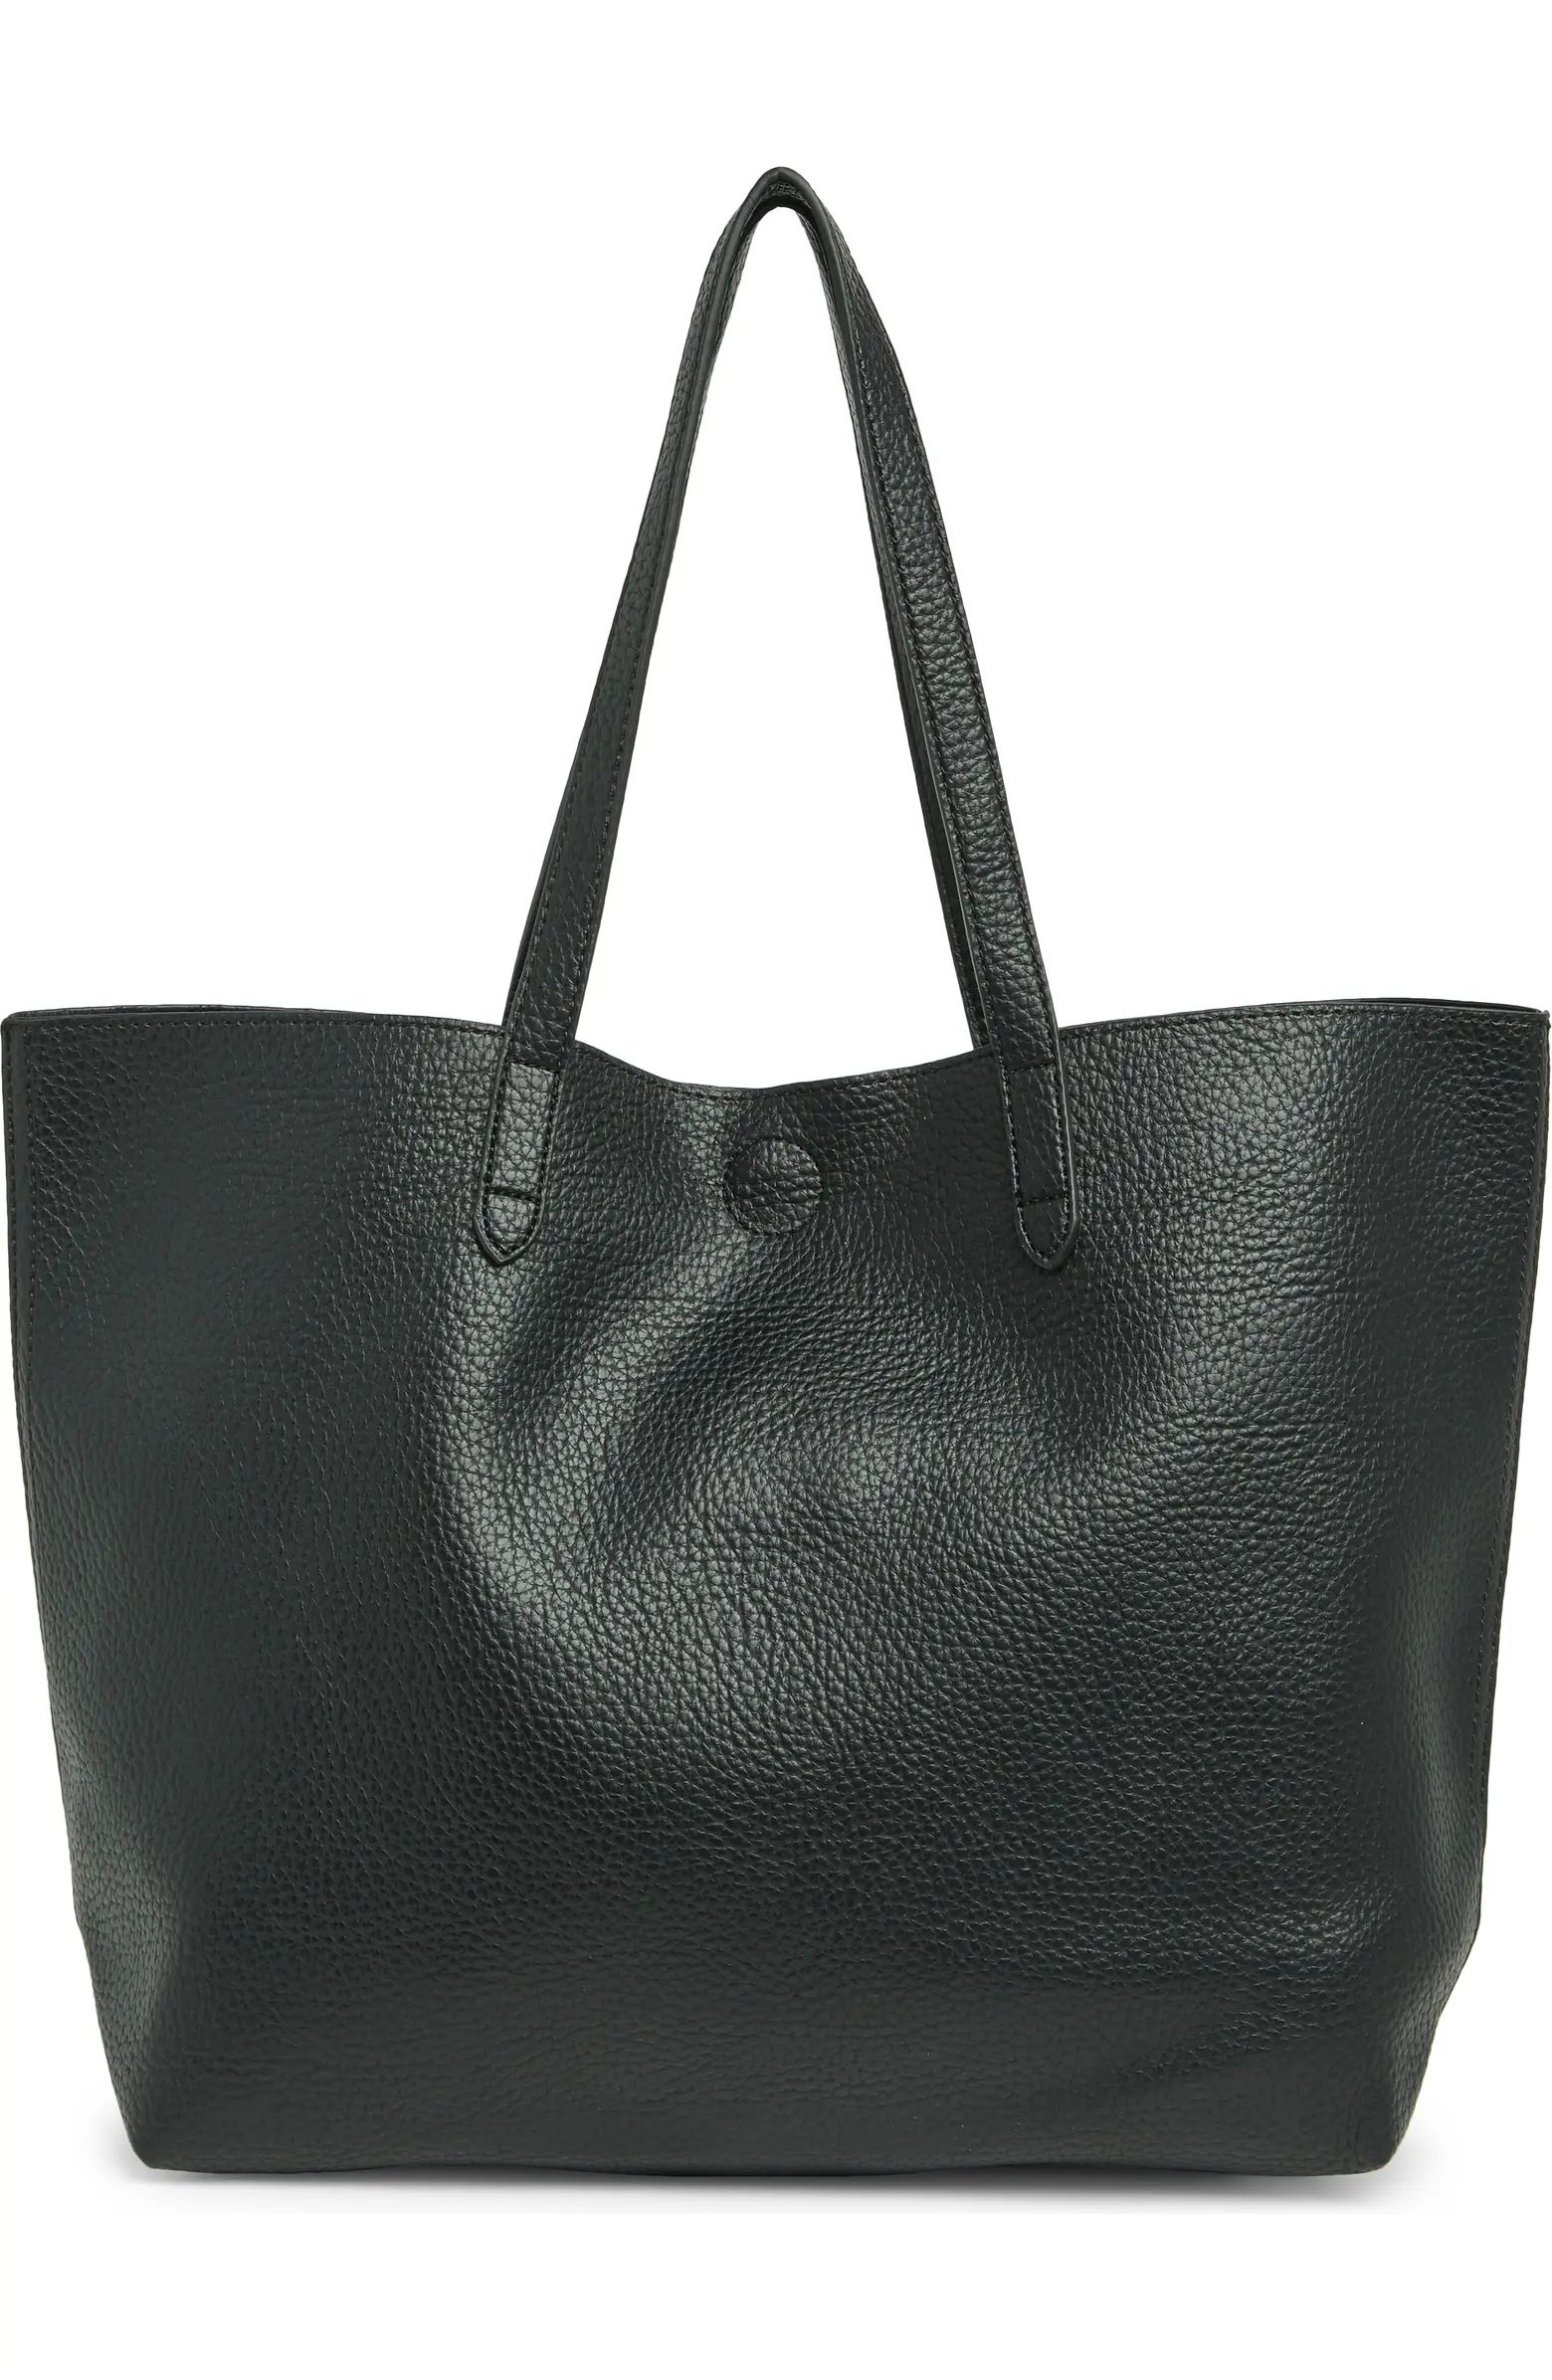 URBAN EXPRESSIONS HANDBAGS Sully Faux Leather Tote | Nordstromrack | Nordstrom Rack